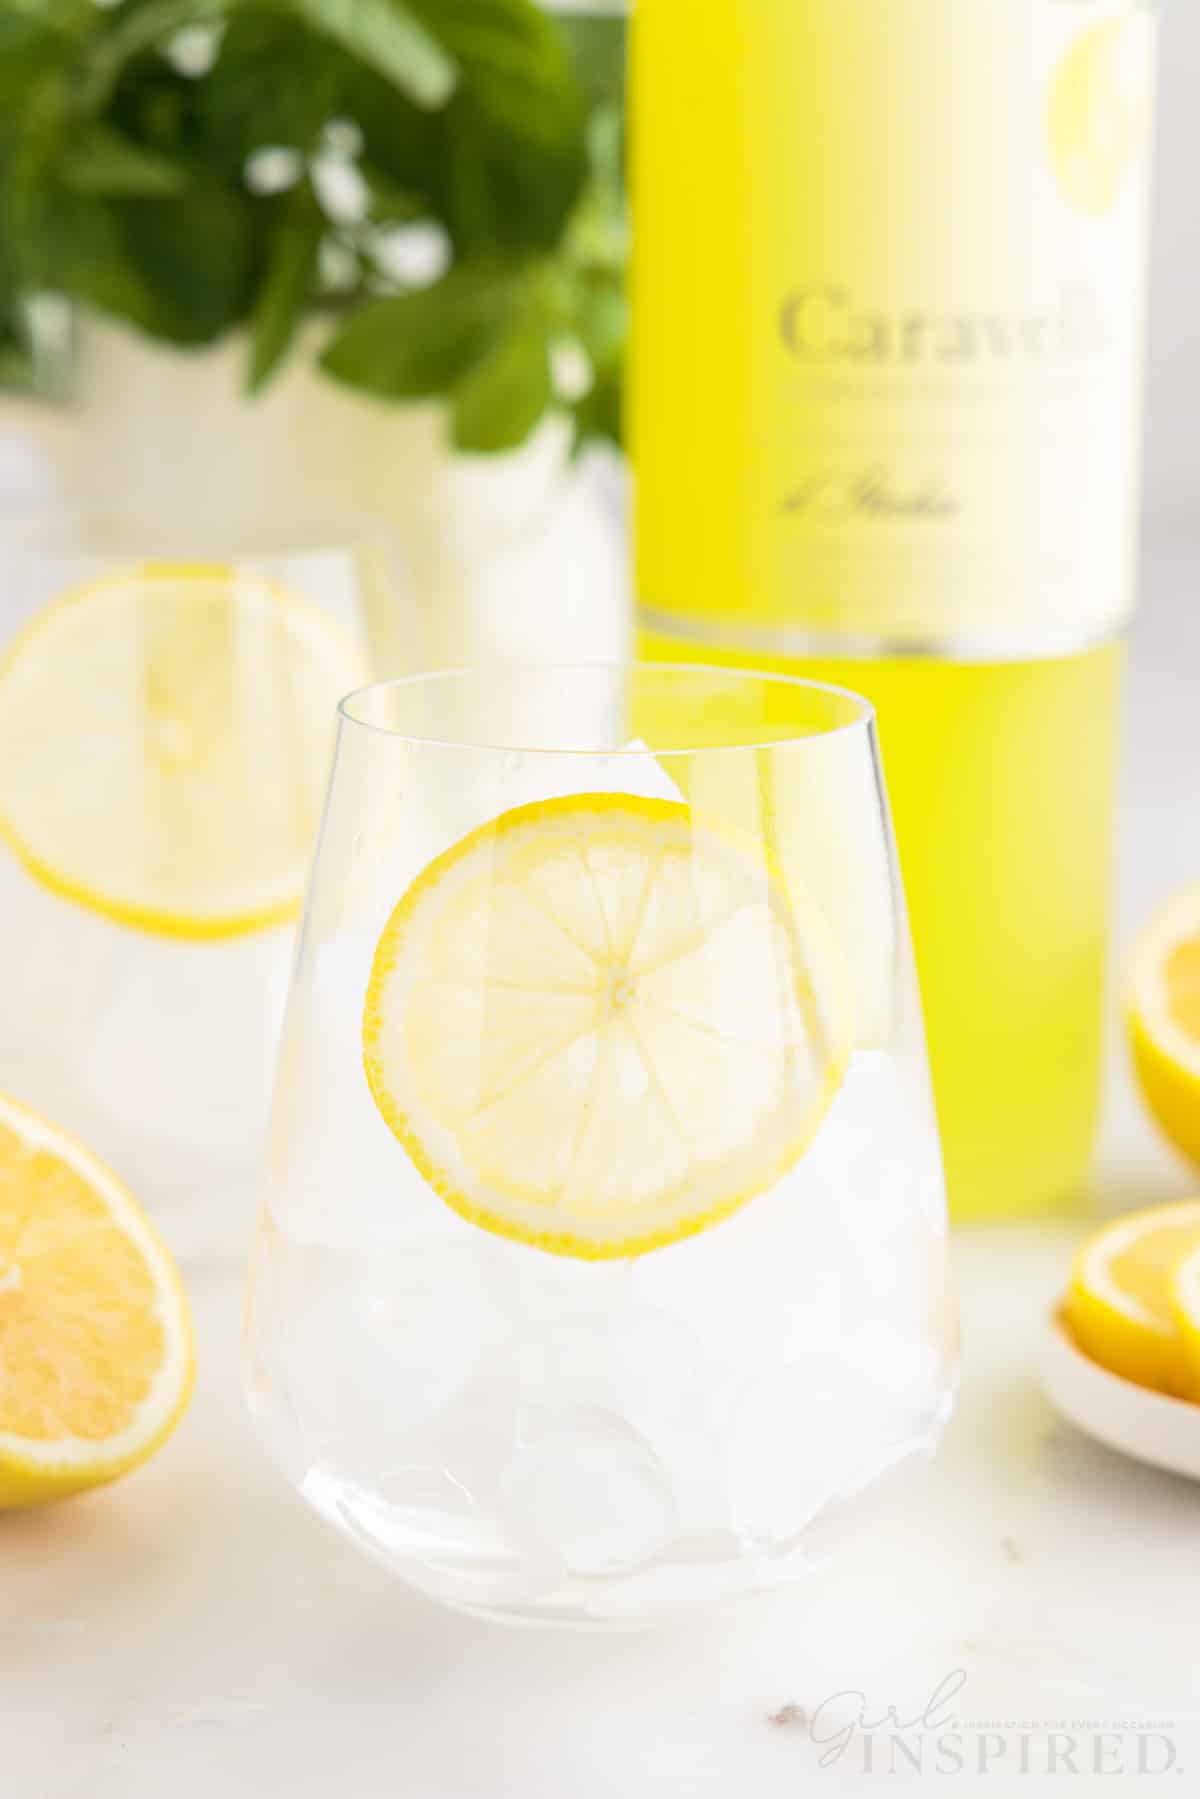 Two glasses of ice with lemon slices in them with a bottle of Limoncello in the background.